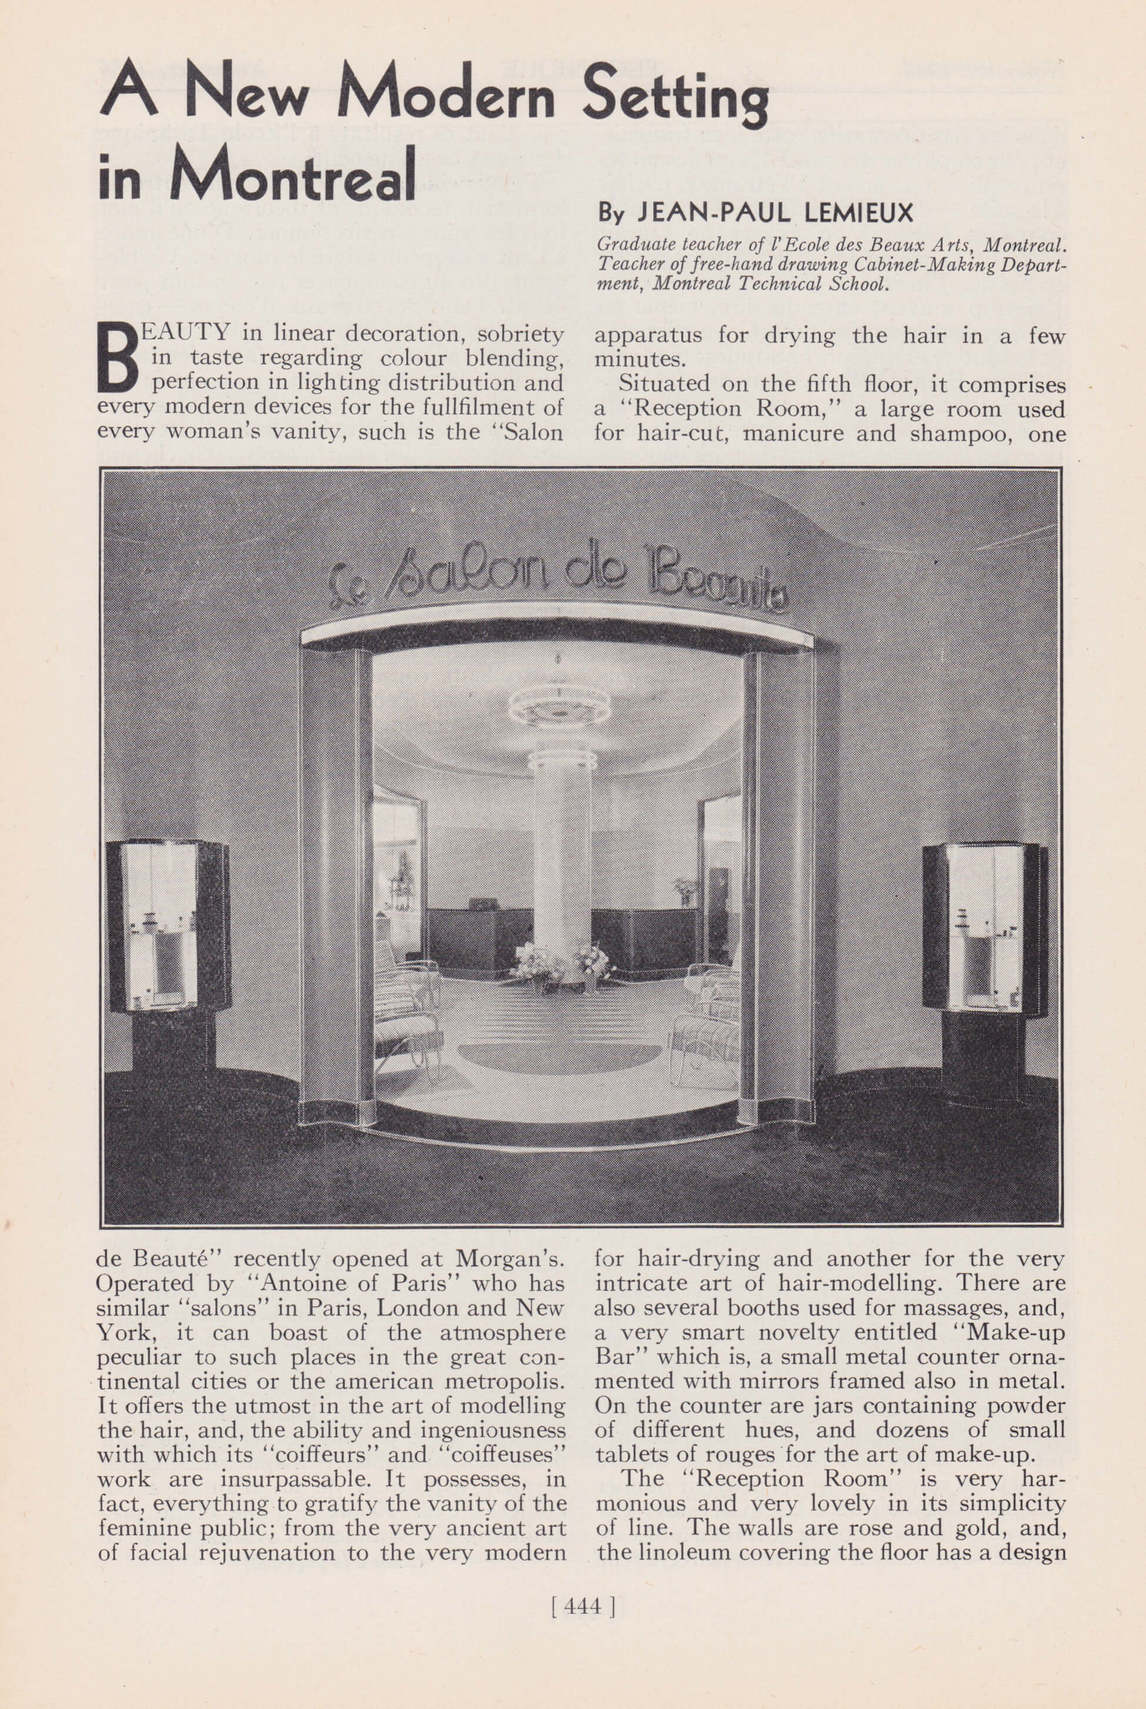 Art Canada Institute, photograph of “A New Modern Setting in Montreal,” by Jean Paul Lemieux. Technique: Revue industrielle/Industrial Review, Montreal, vol. 10, no. 9